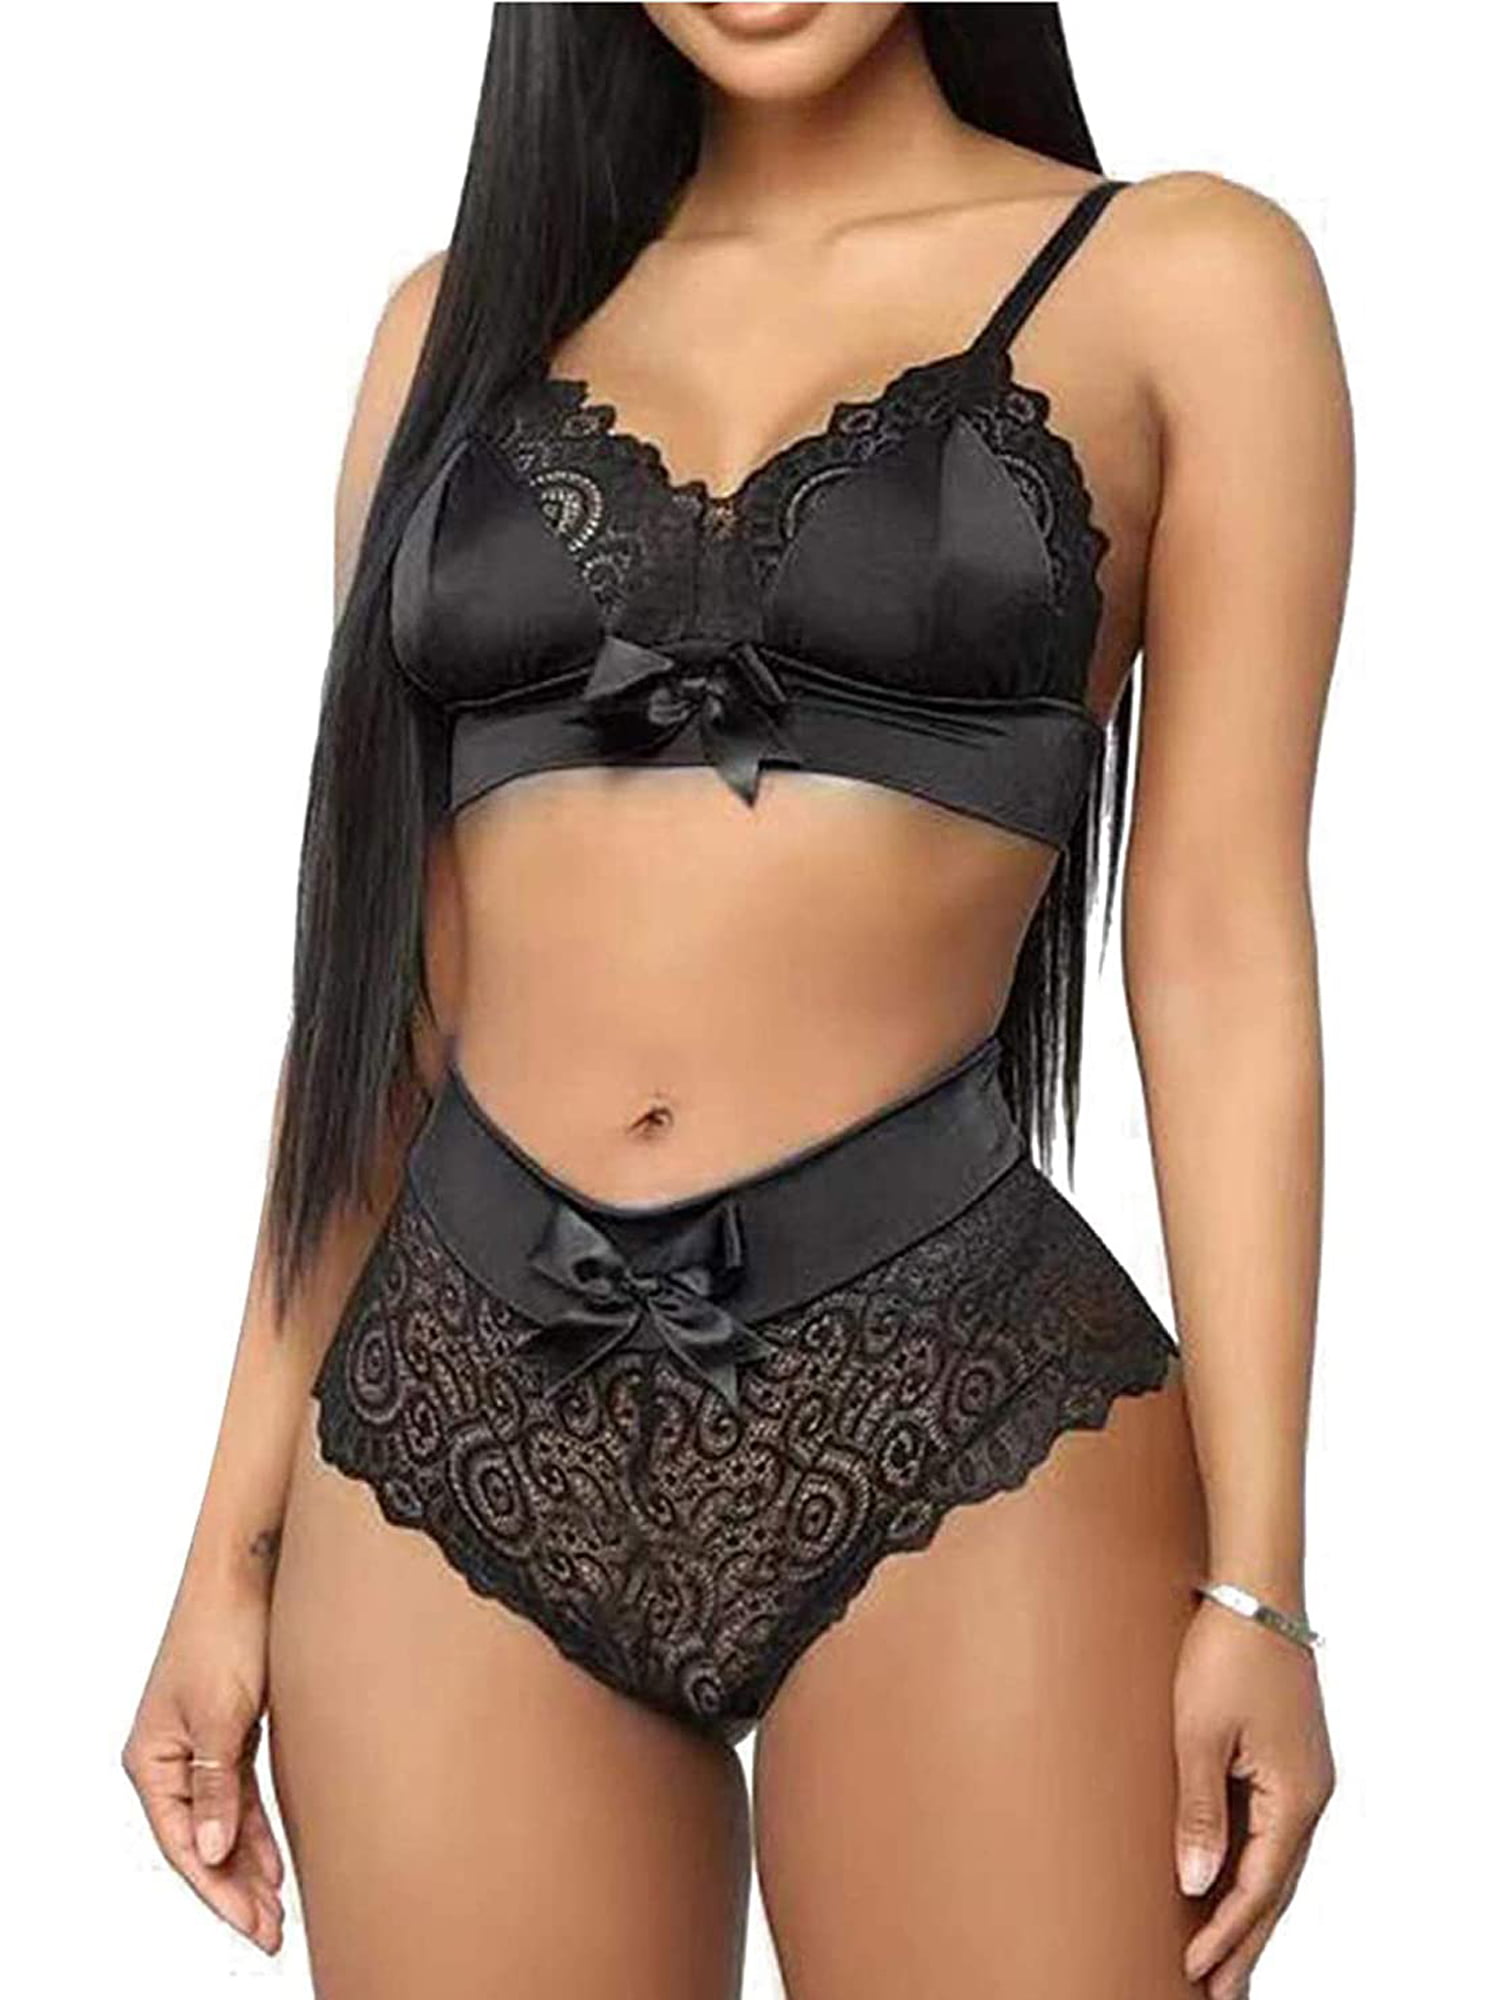 BrilliantMe Women Lace Lingerie Set Nightwear See-Through Floral Sling Bra  and Briefs 2pcs Black S